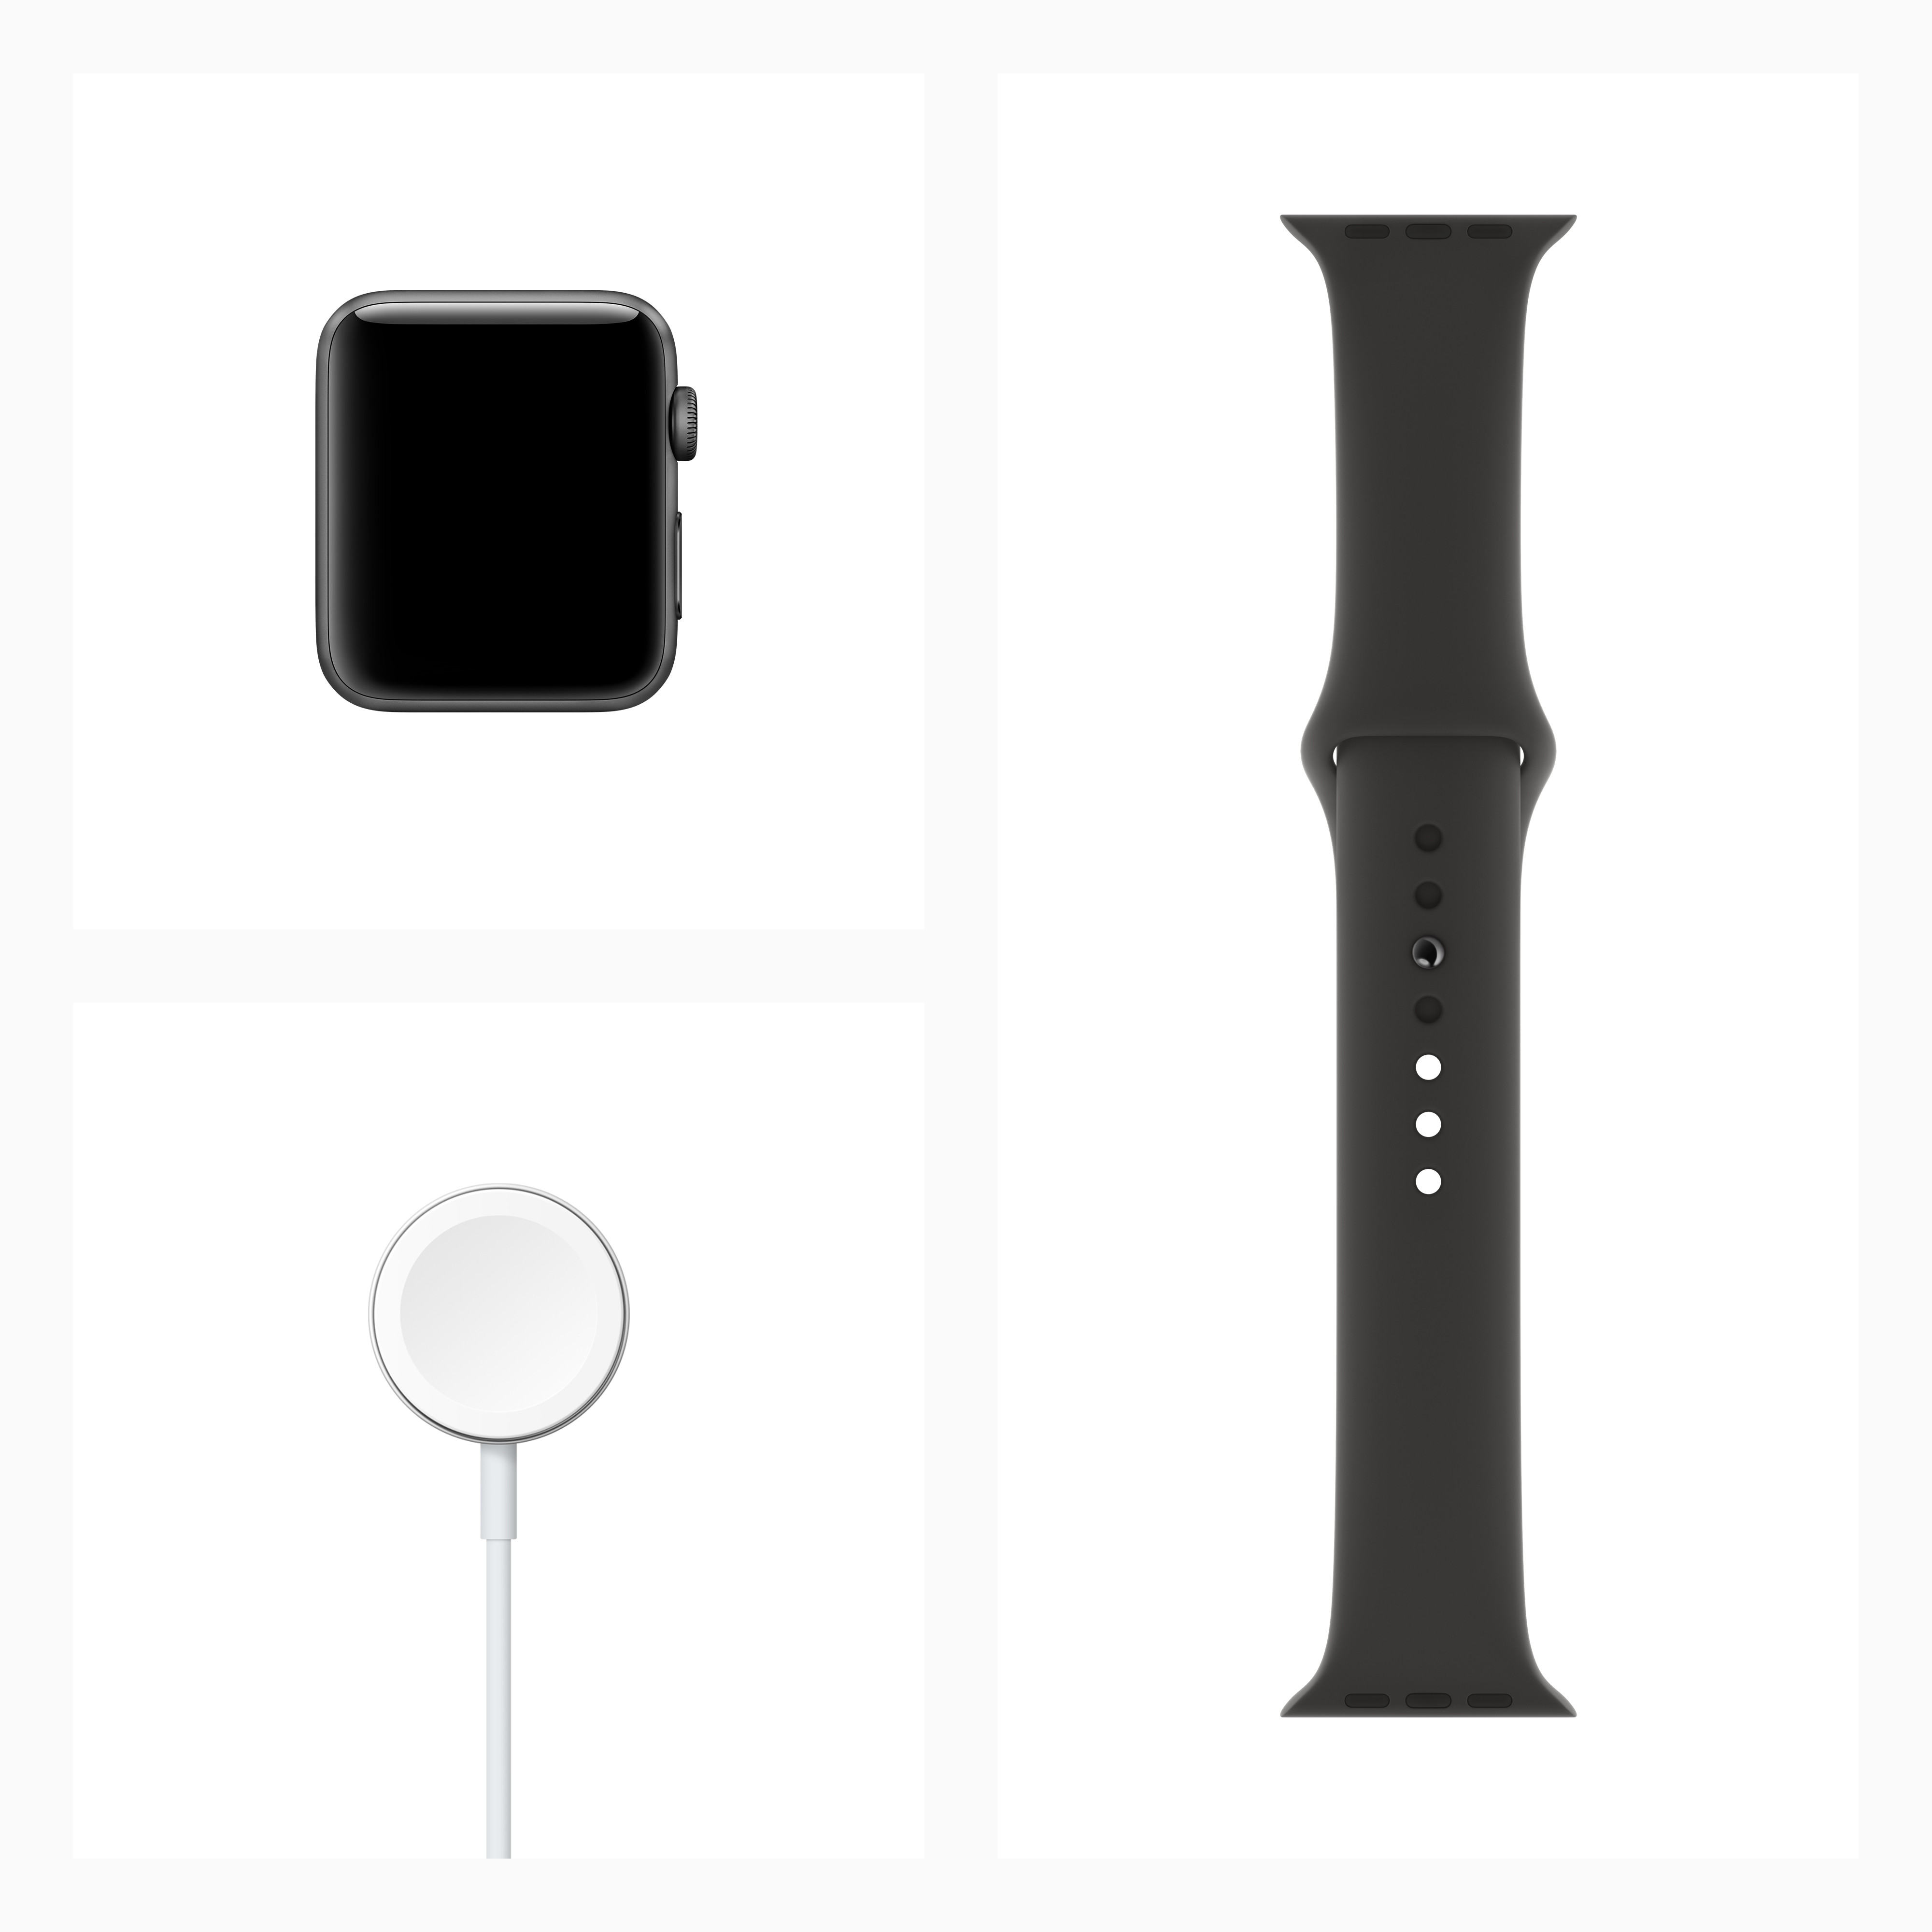 Apple Watch Series 3 GPS Space Gray - 42mm - Black Sport Band - image 6 of 6